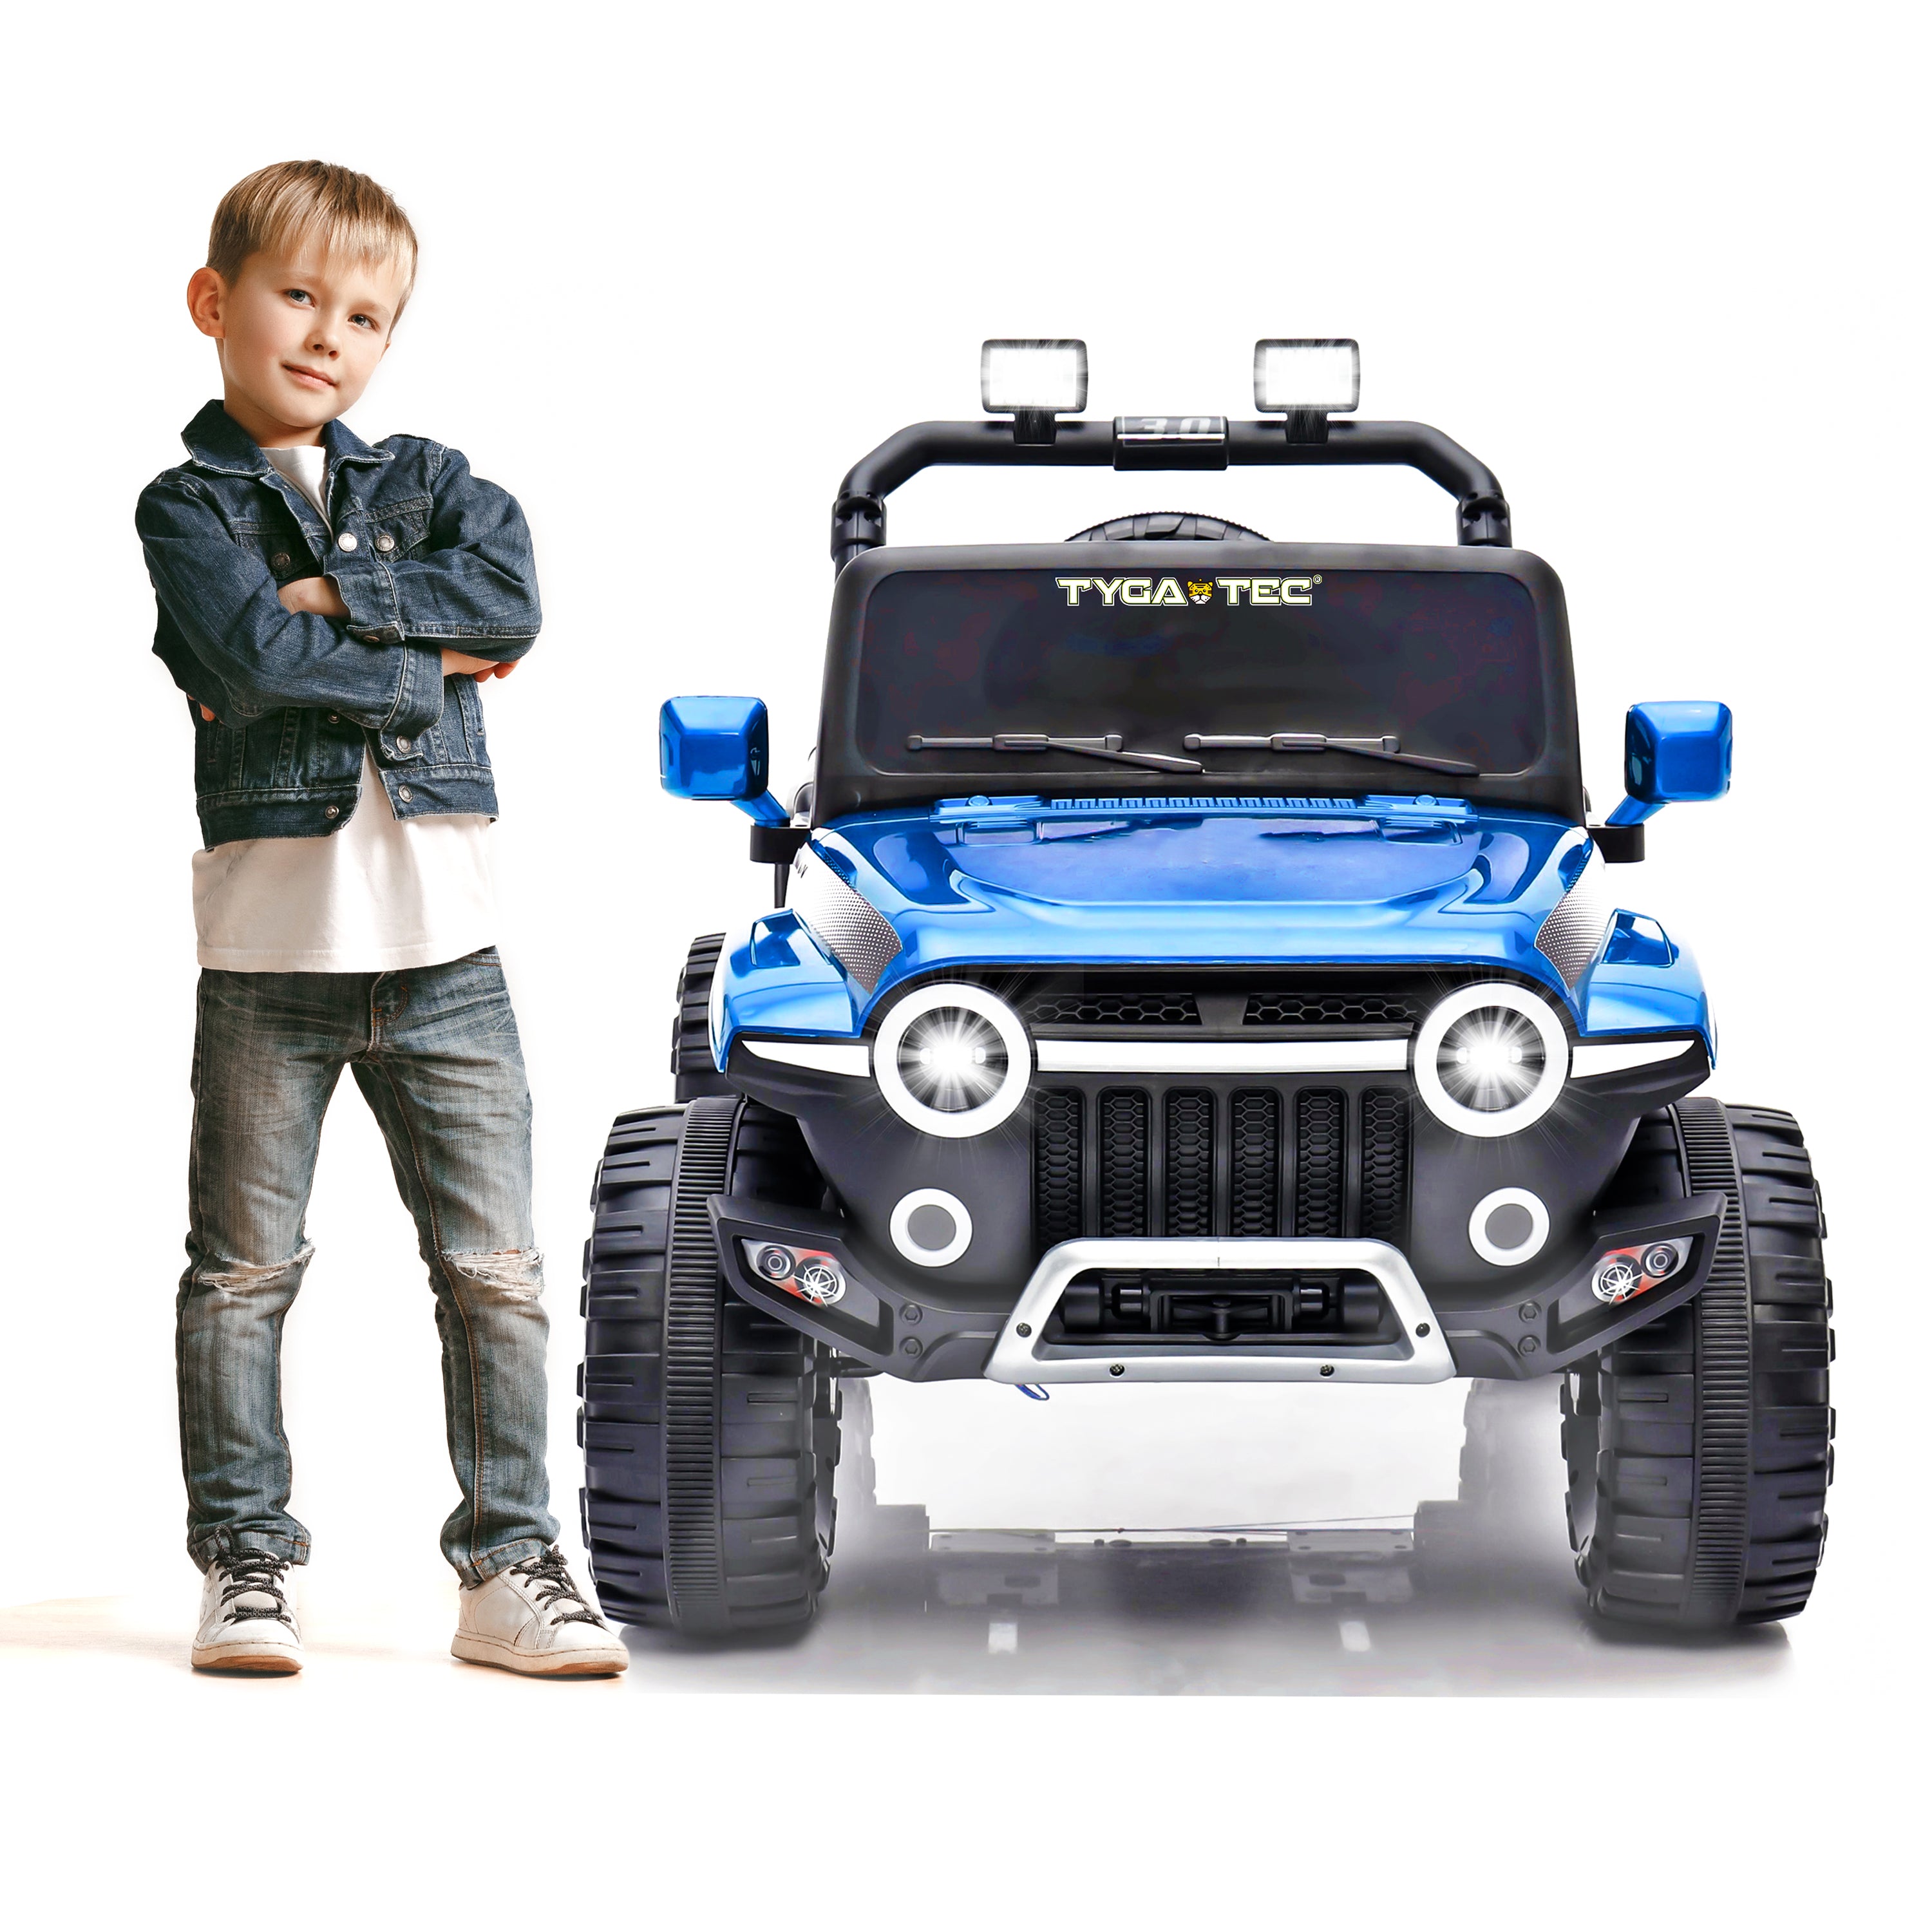 Tygatec Ride-on Kids Car Ground Force SCOUT ( Blue color)